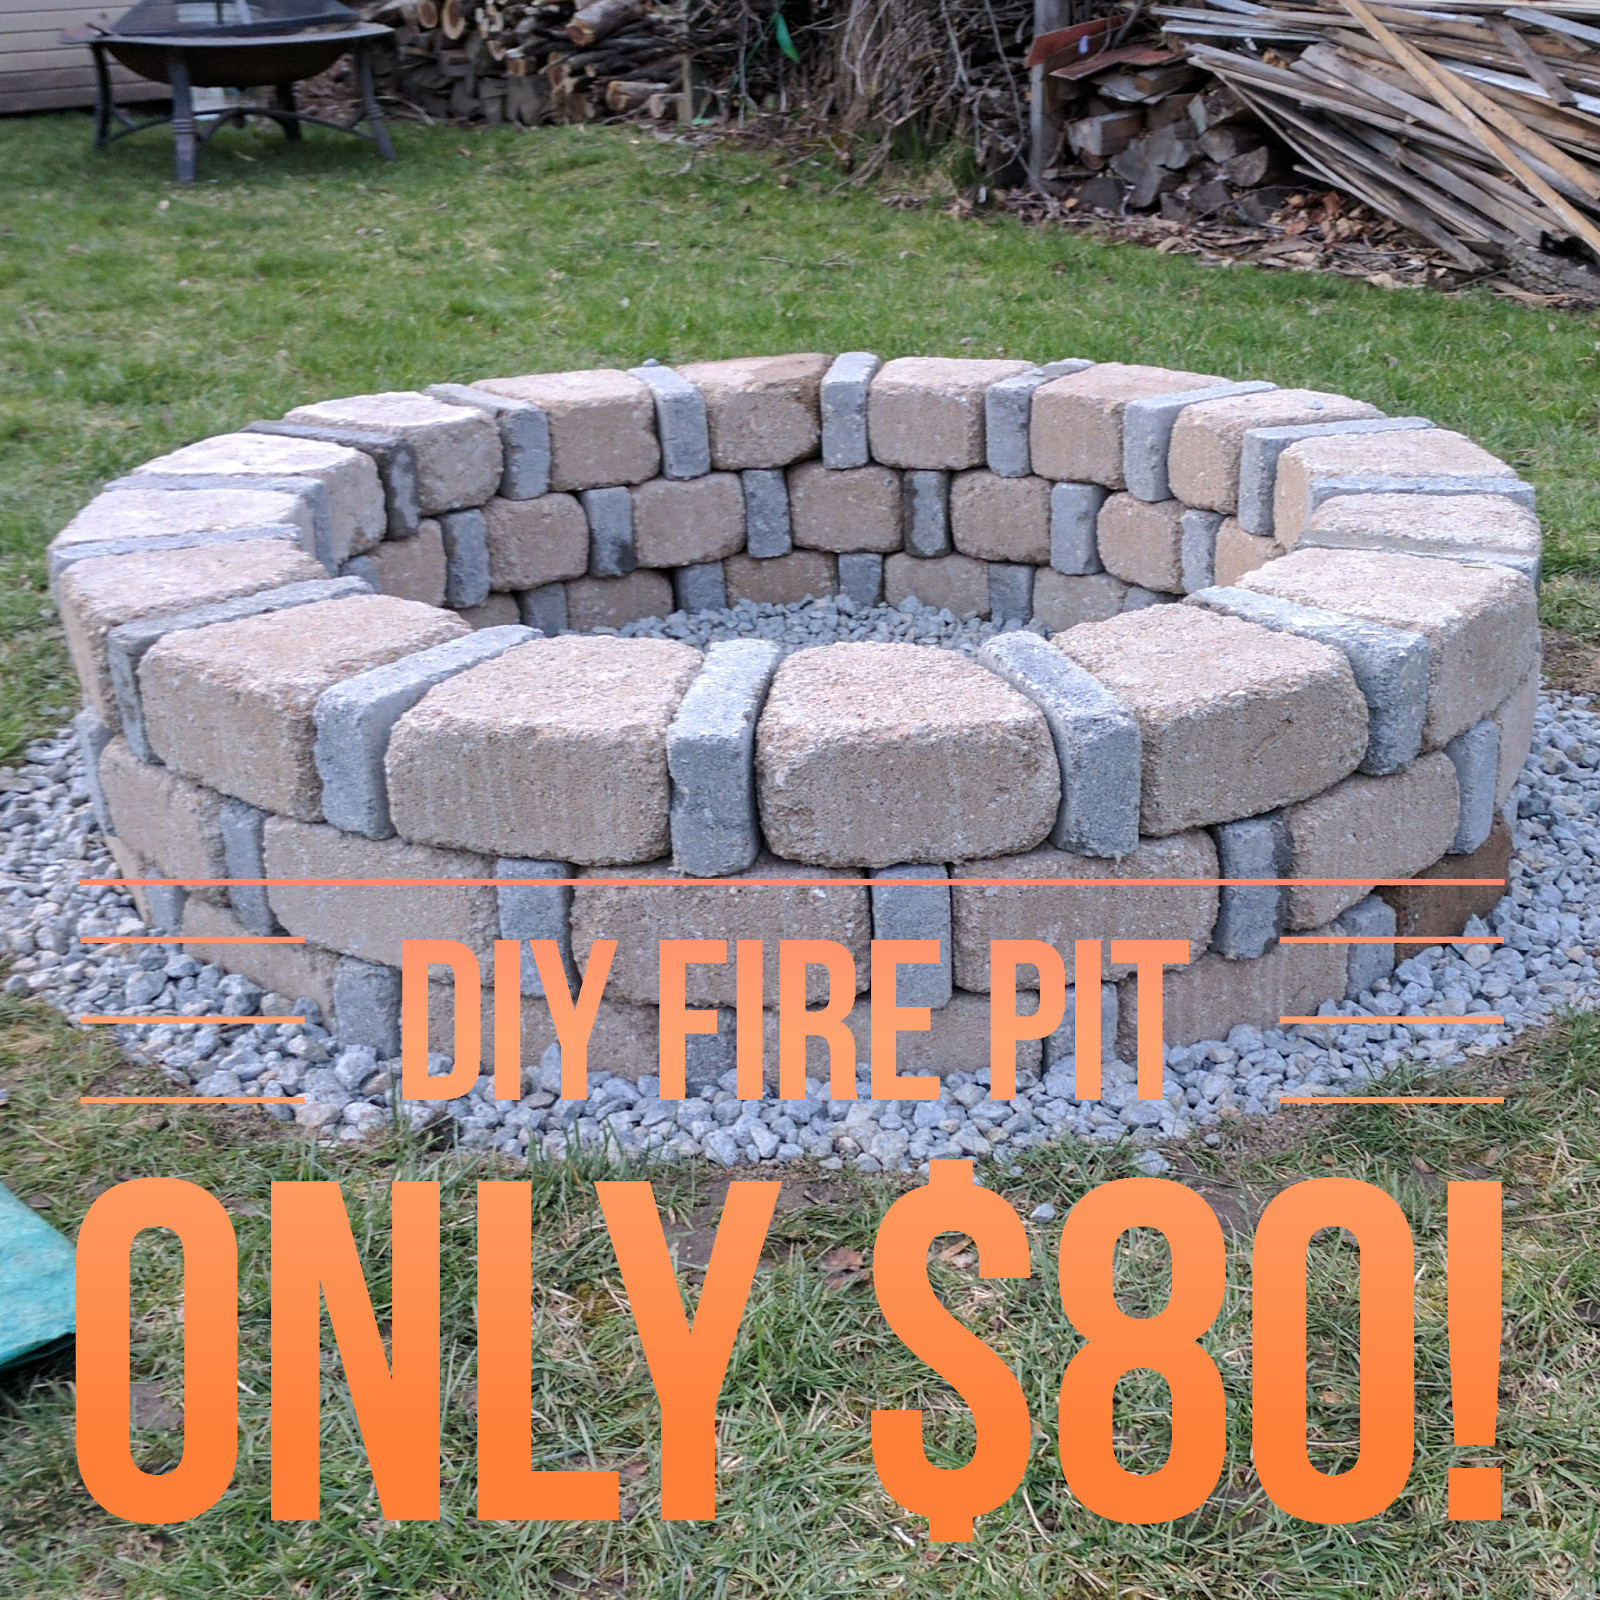 DIY Outdoor Fire Pits
 DIY Brick Fire Pit For ly $80